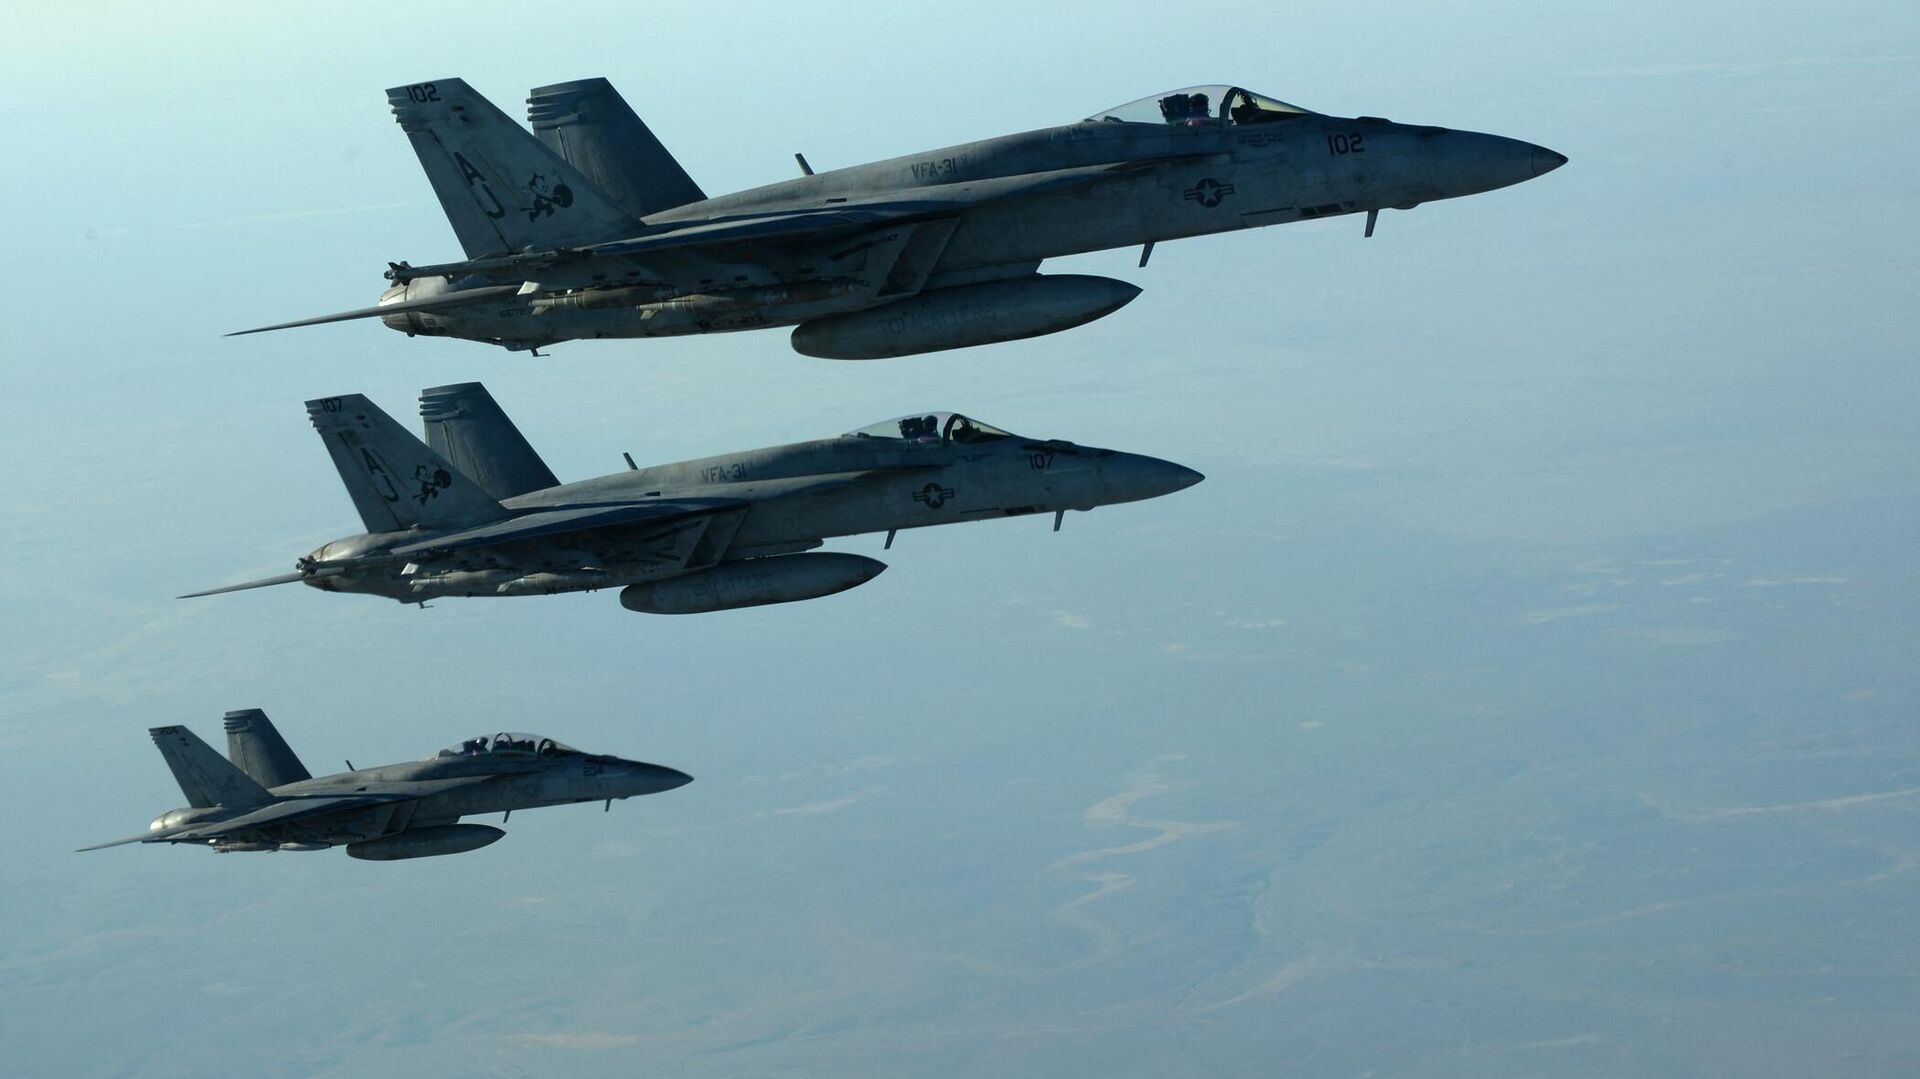 This US Air Forces Central Command photo released by the Defense Video & Imagery Distribution System (DVIDS) shows a formation of US Navy F-18E Super Hornets in flight after receiving fuel from a KC-135 Stratotanker over northern Iraq, on September 23, 2014 - اسپوتنیک افغانستان  , 1920, 10.02.2024